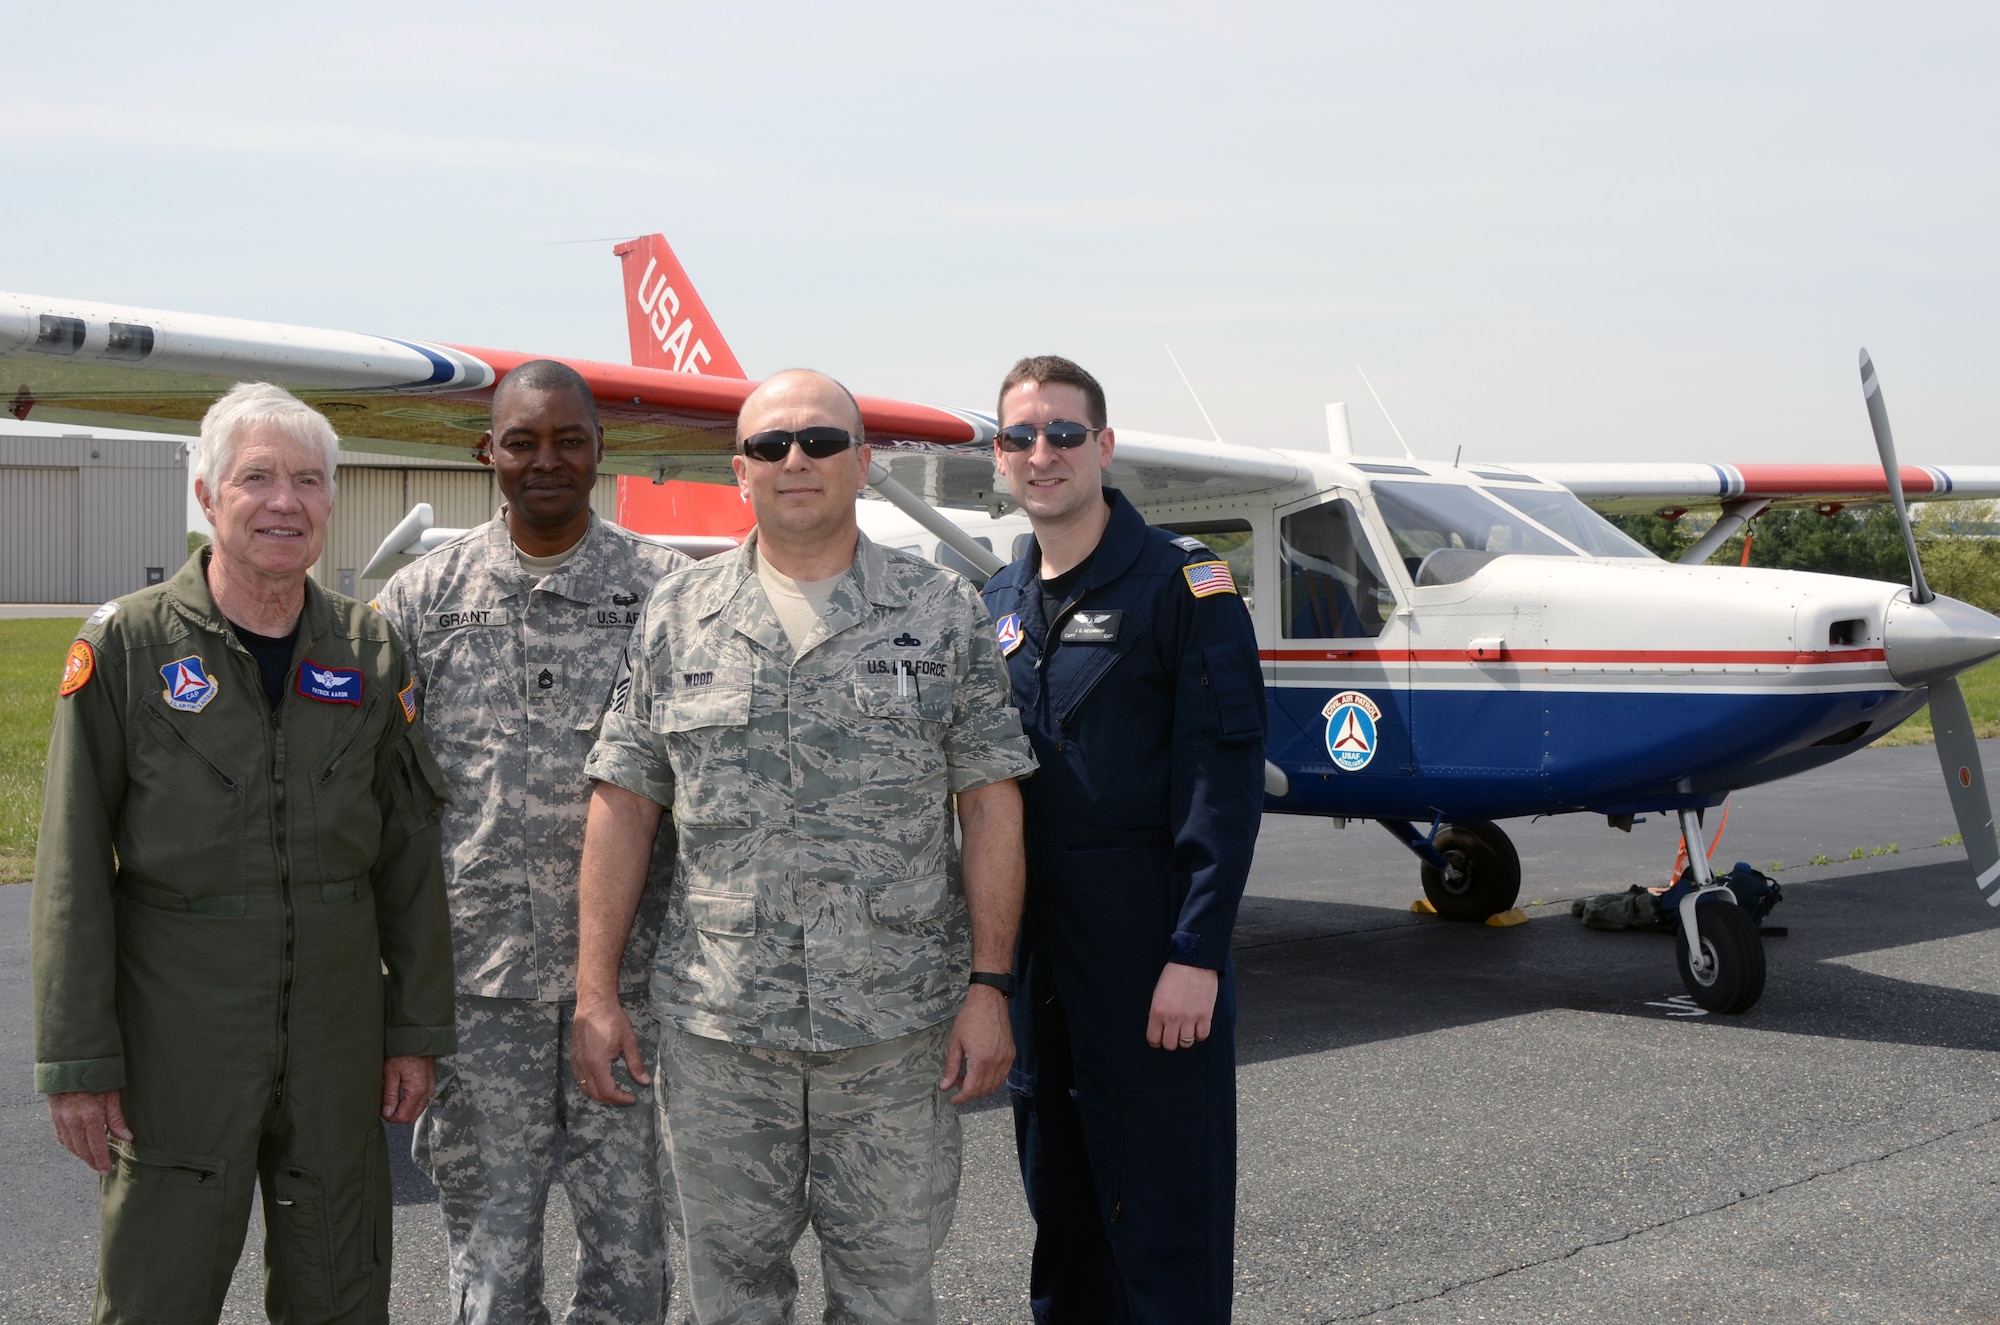 (L-R) CAP Capt. Patrick Aaron, U.S. Army Sgt. 1st Class Matthew J. Grant, U.S. Air Force Master Sgt. Clyde J. Wood, and CAP Capt. Jonathan Neumann, complete a training mission over the C and D canal, a body of water connecting the Chesapeake and Delaware Bays, with the Geospatial Information Interoperability Exploitation-Portable system at Warfield Air National Guard Base, Baltimore, MD on April 14, 2012.  The GIIEP system gives incident commanders on the ground real time images in emergency situations and the Air and Army National Guard work with the CAP in operating the system. (National Guard Photo By Staff Sgt. Benjamin Hughes/RELEASED)